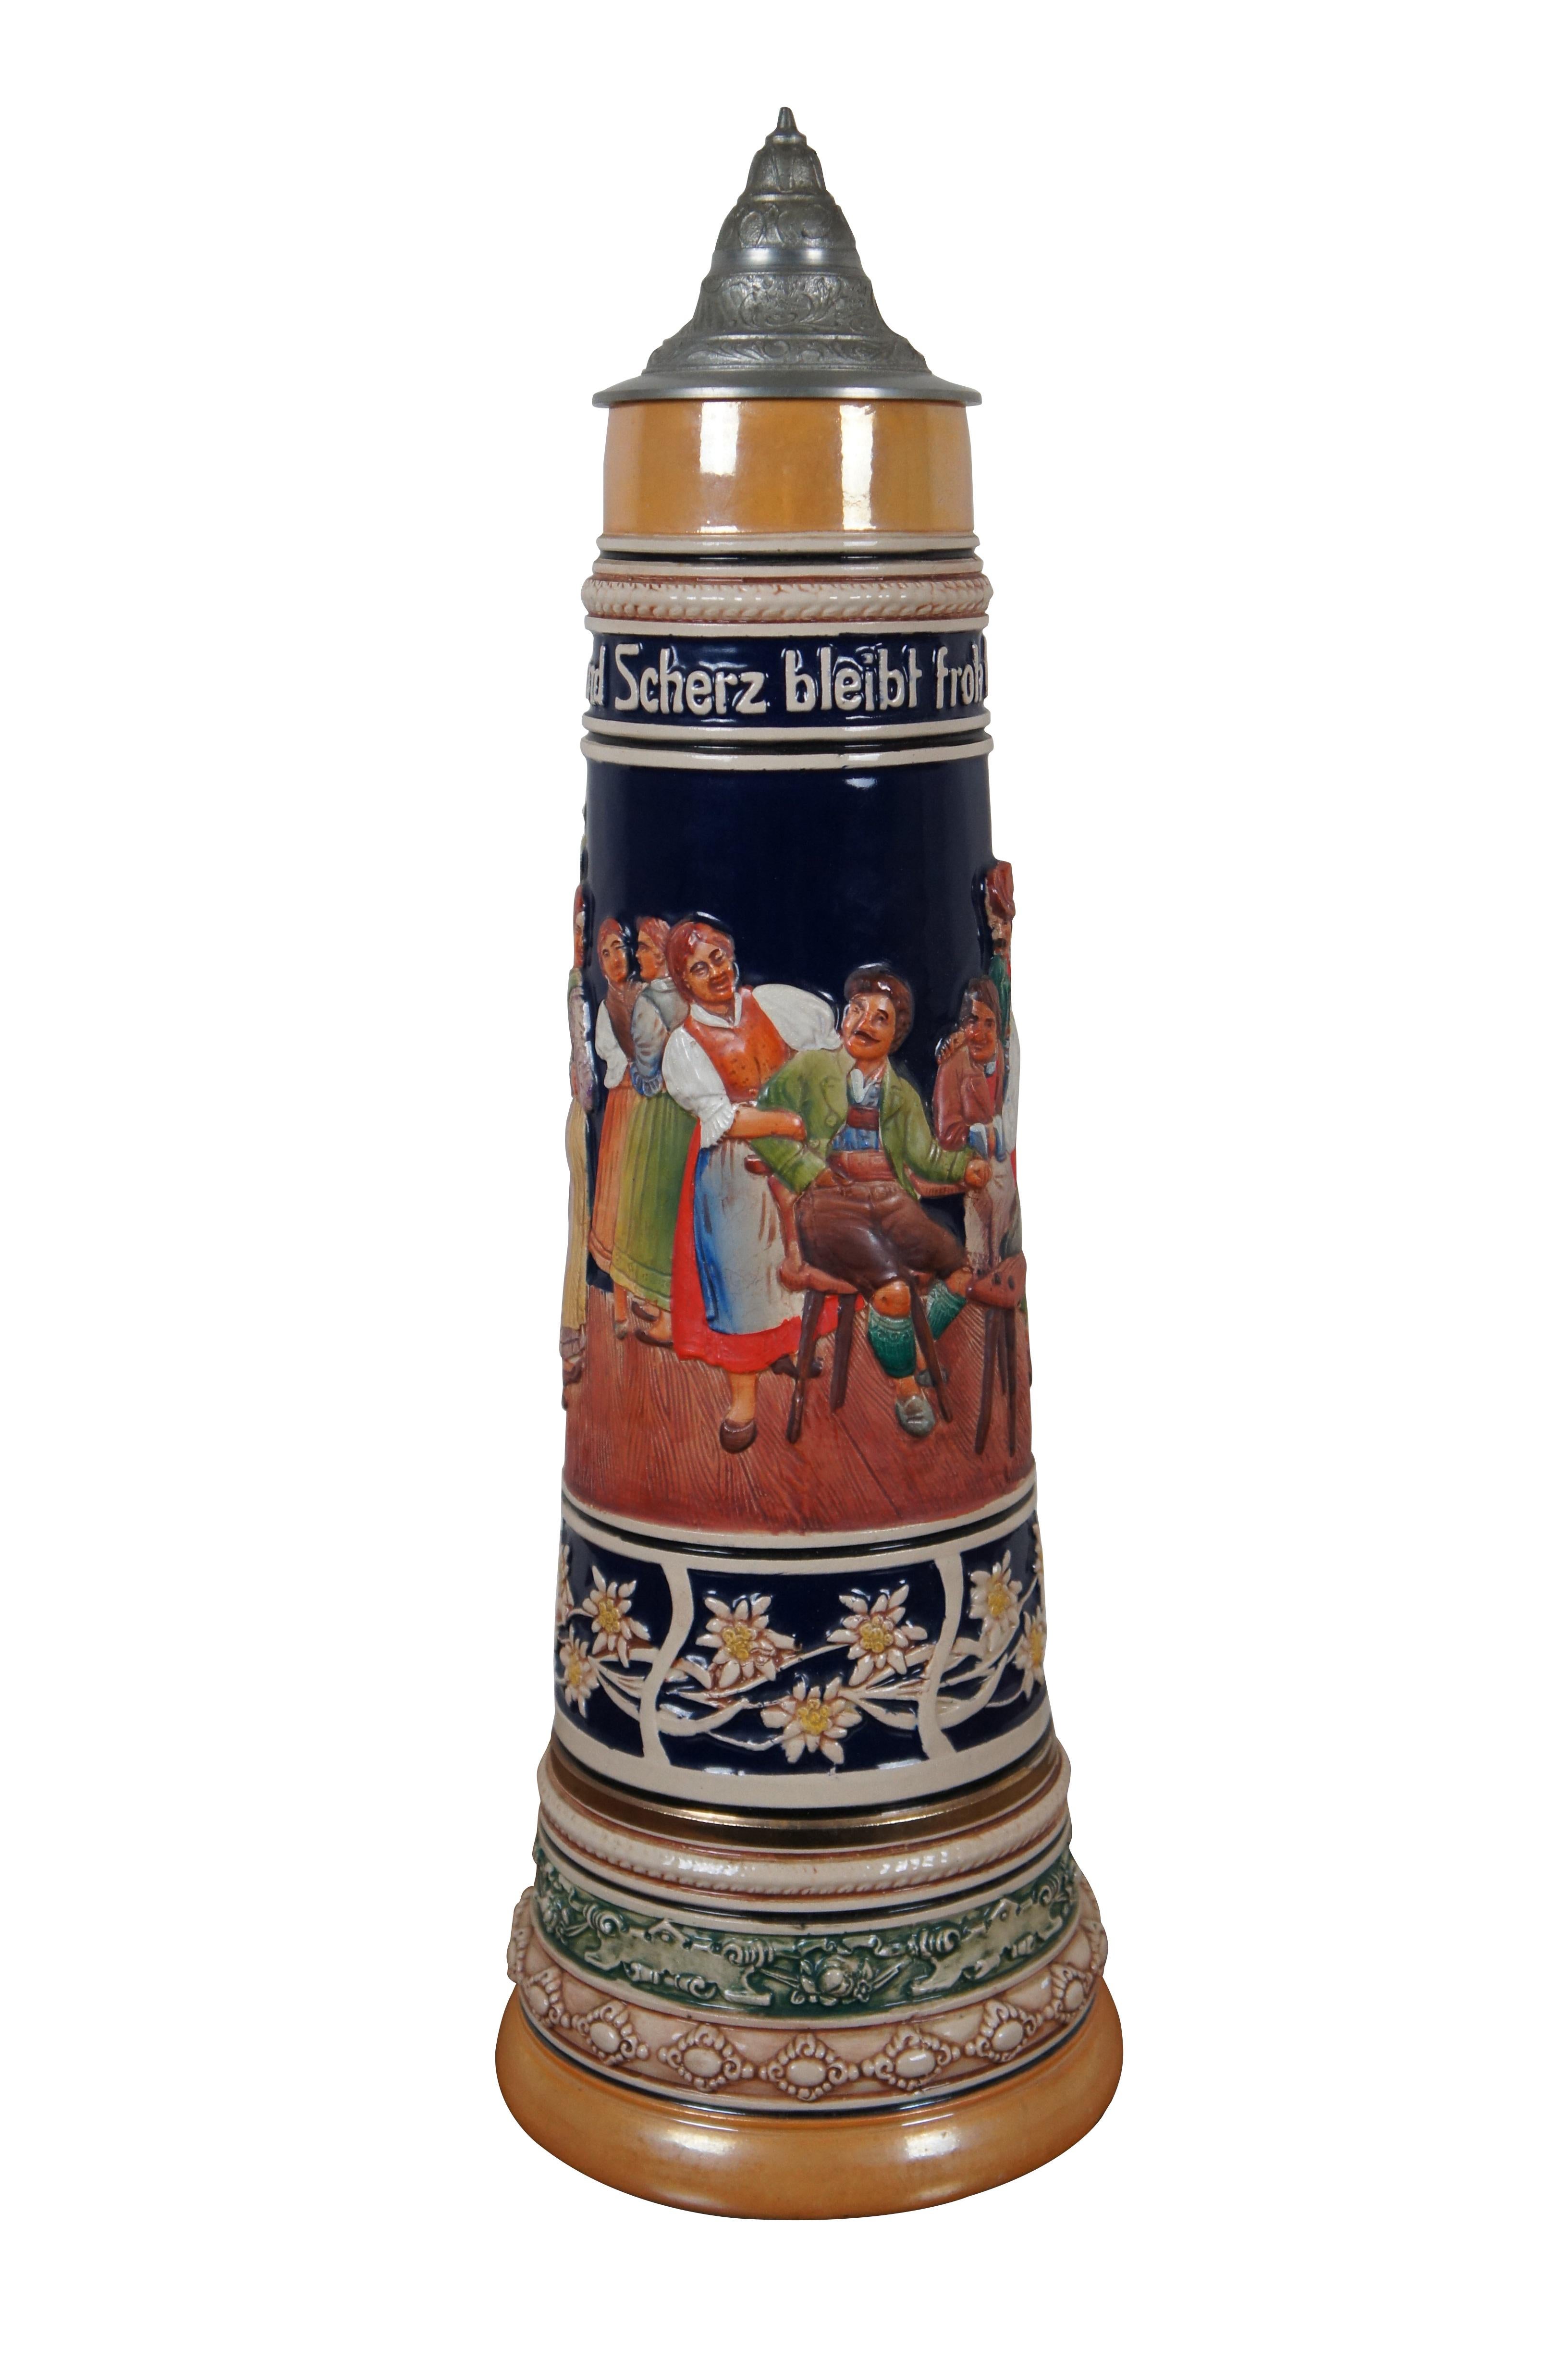 Very large mid 20th century 4 liter ceramic beer stein by Gerz. Decorated with a tavern scene, bands of floral patterned motifs, and twisted branch handle. Band around the top reads 